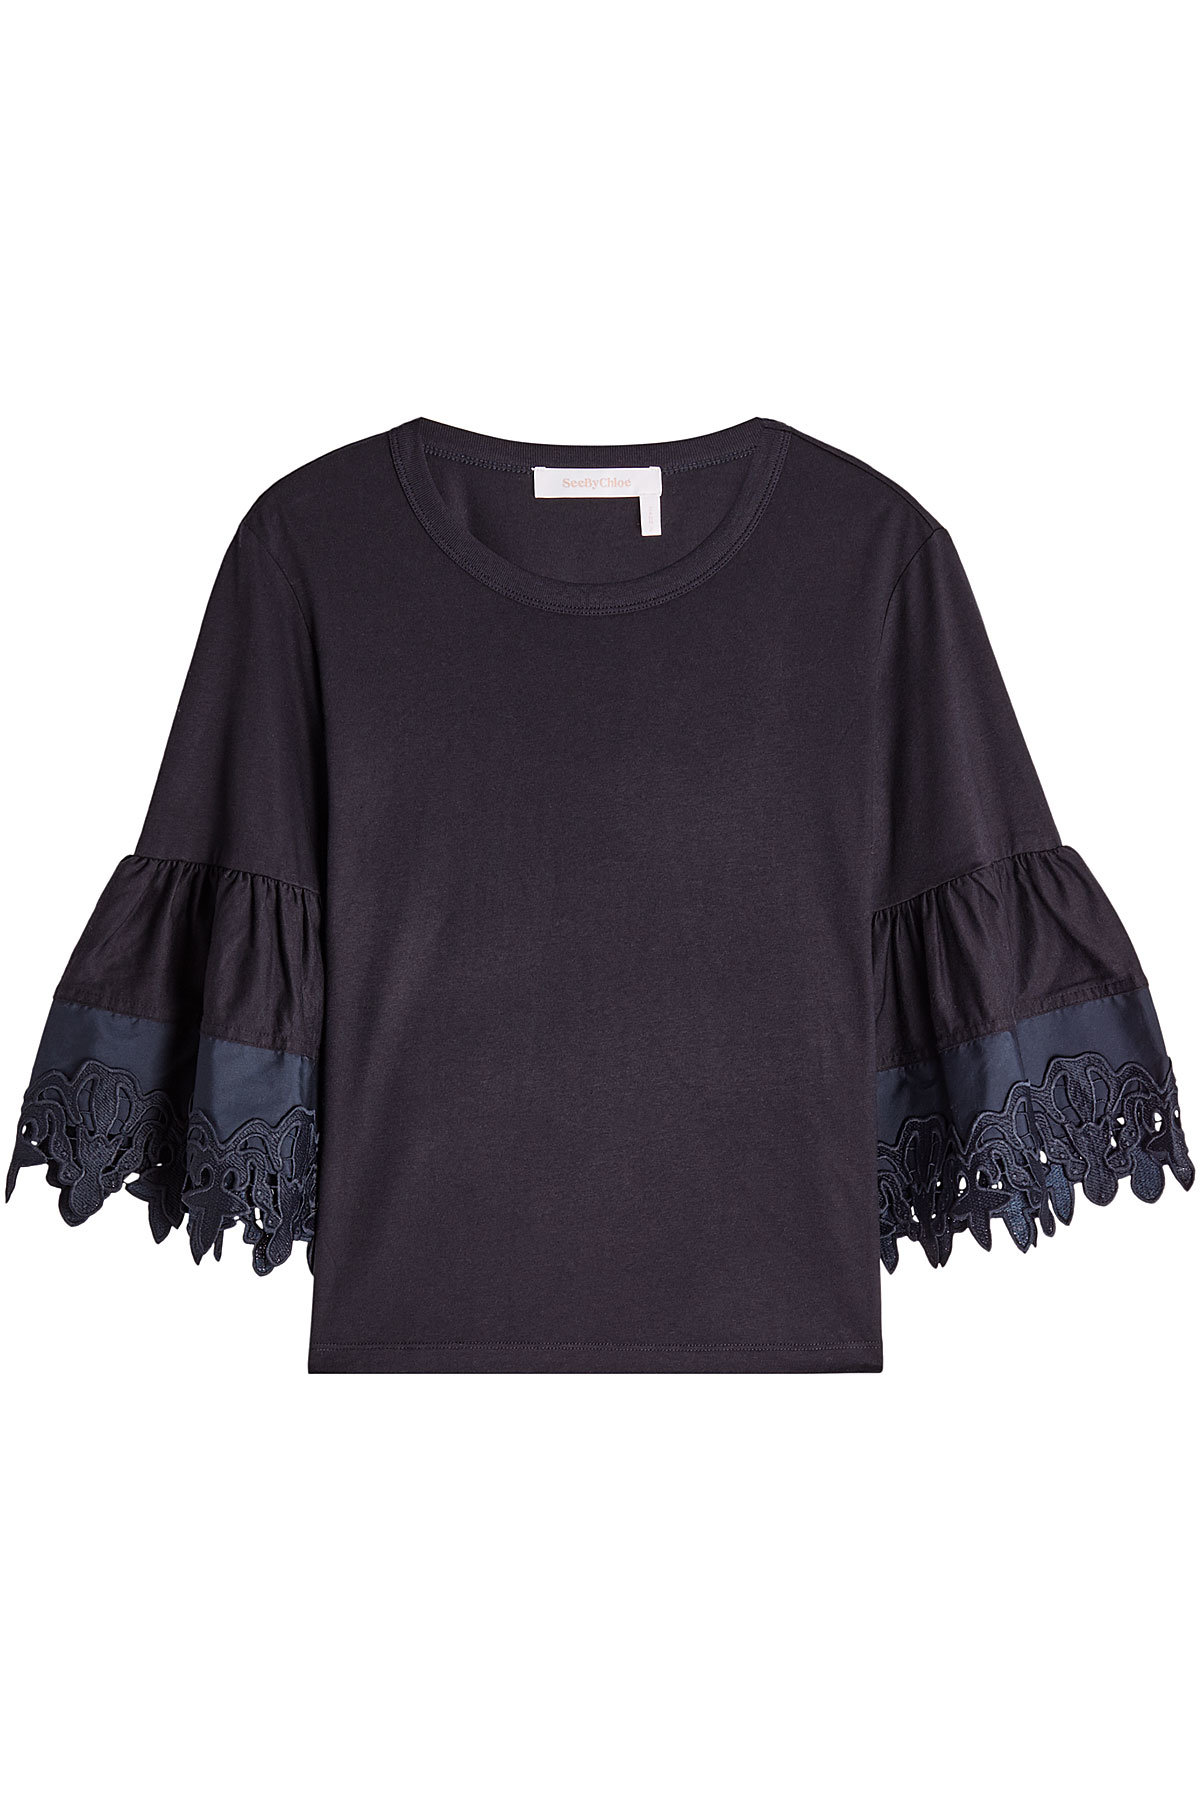 See by Chloe - Fluted Sleeve Cotton Top